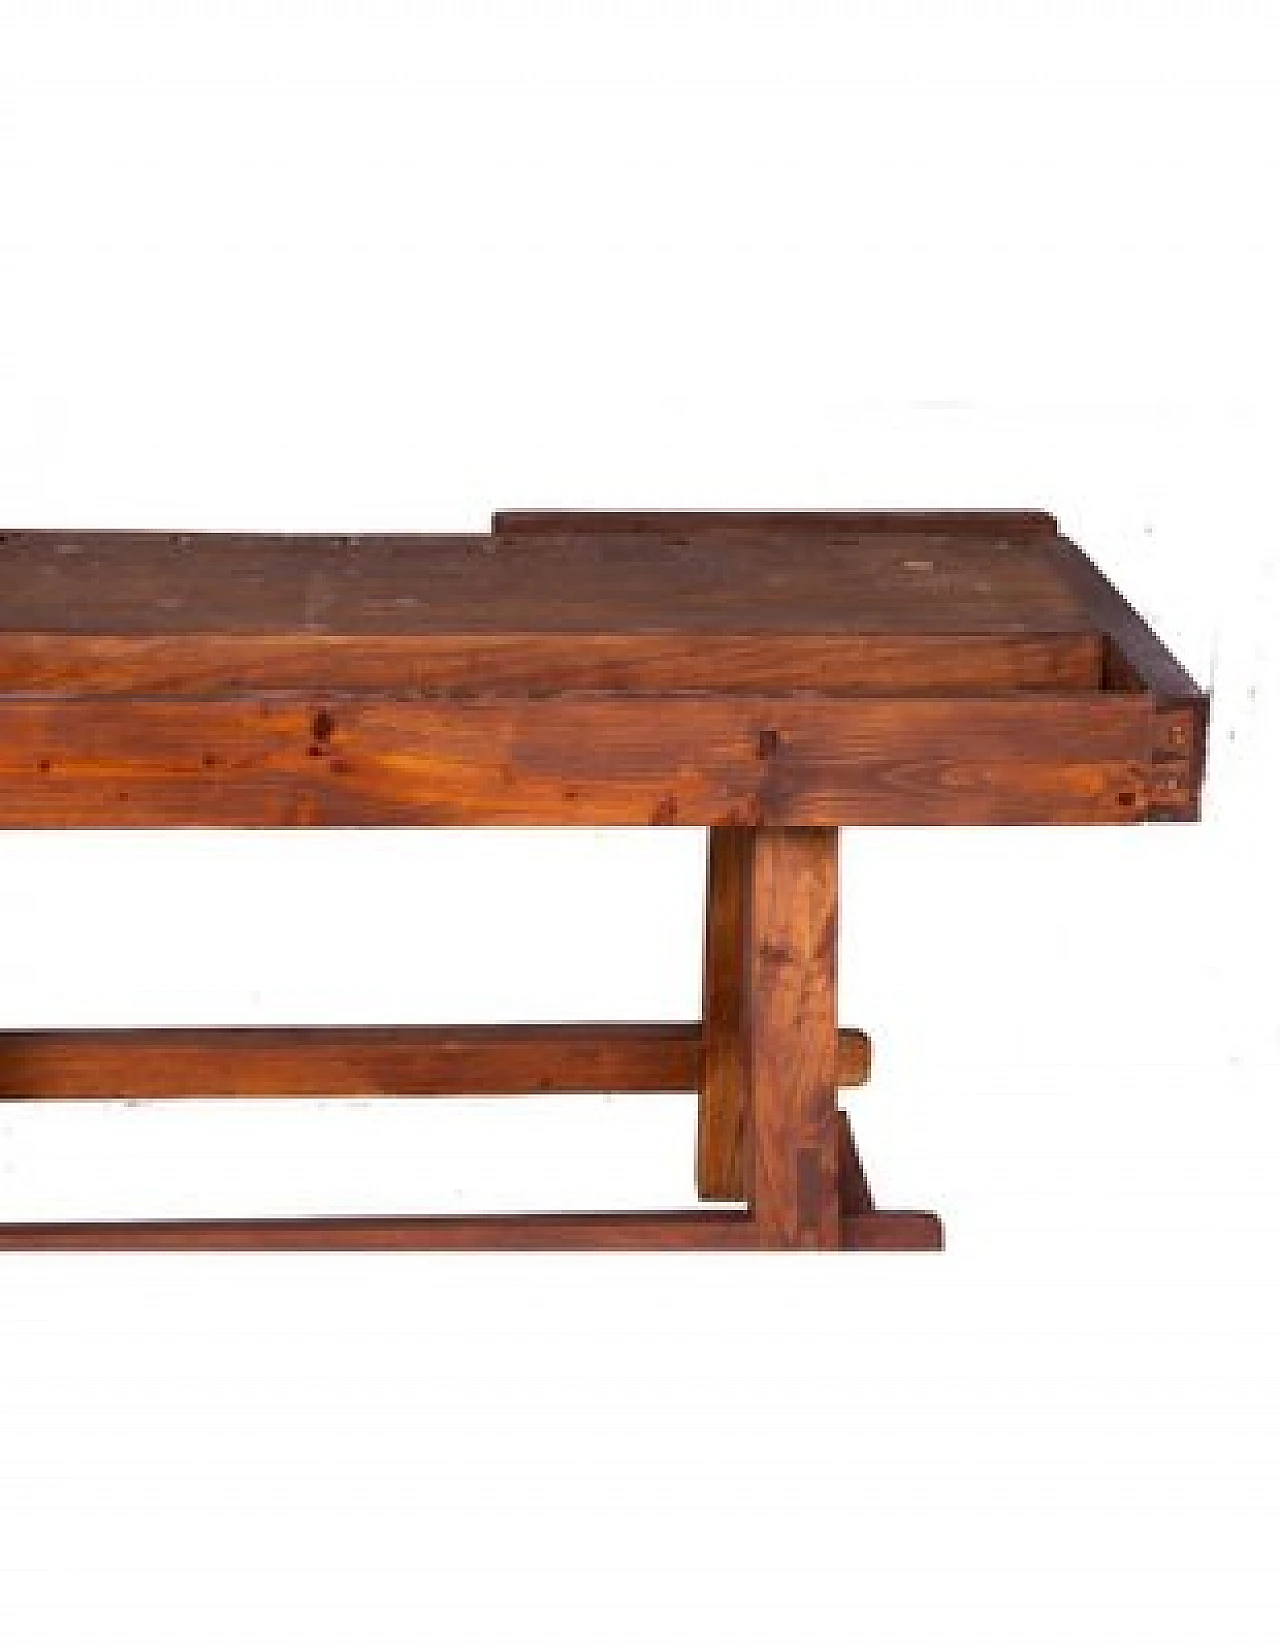 Solid wood and cast iron carpenter's bench 17